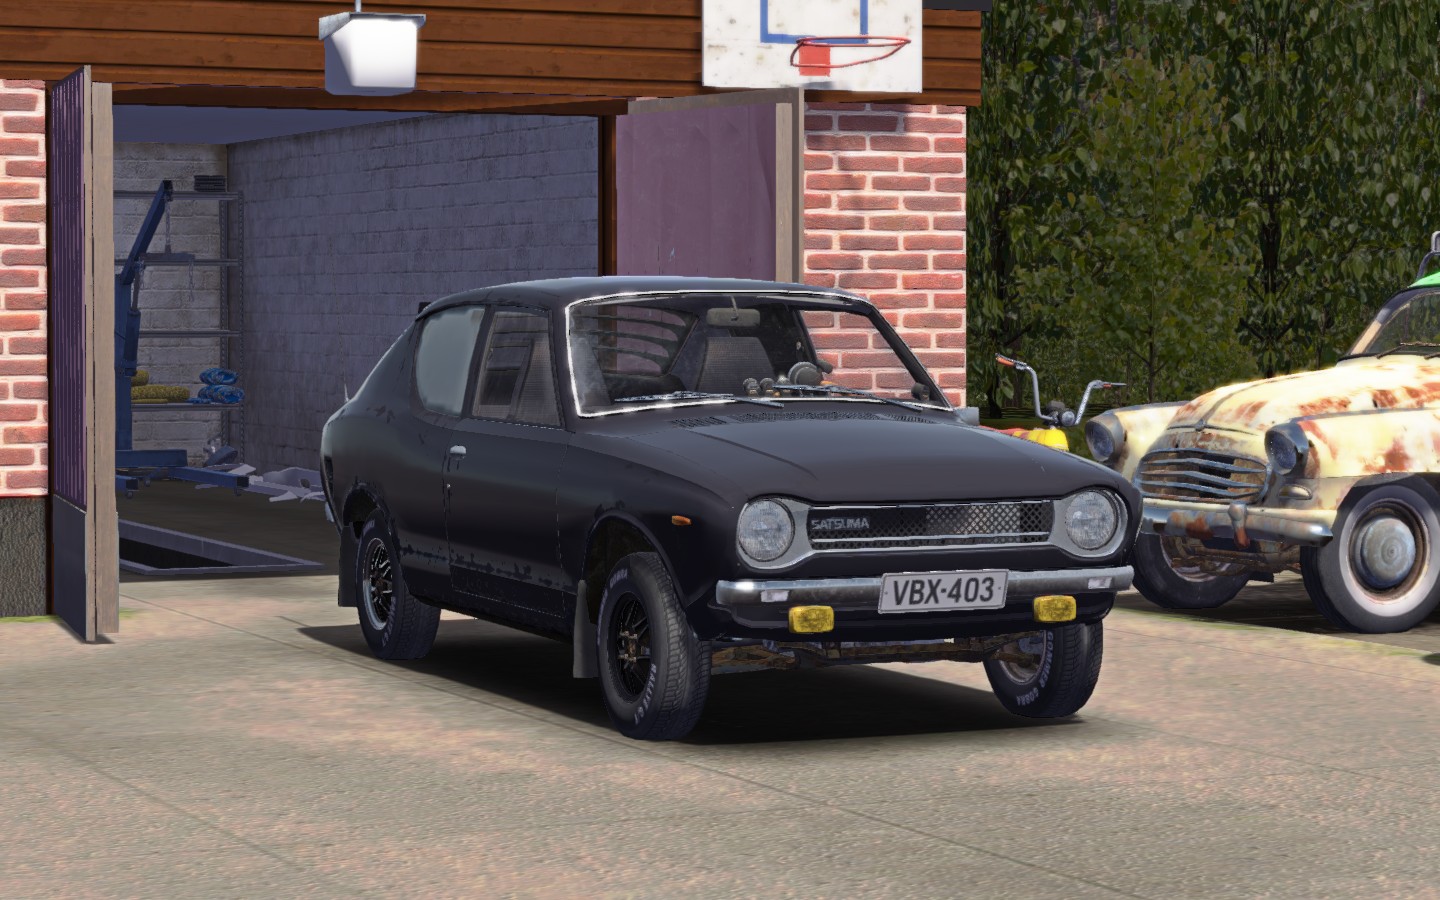 My Summer Car: SaveGame (everything is there, all games on PC, cups, semi-rally Satsuma)